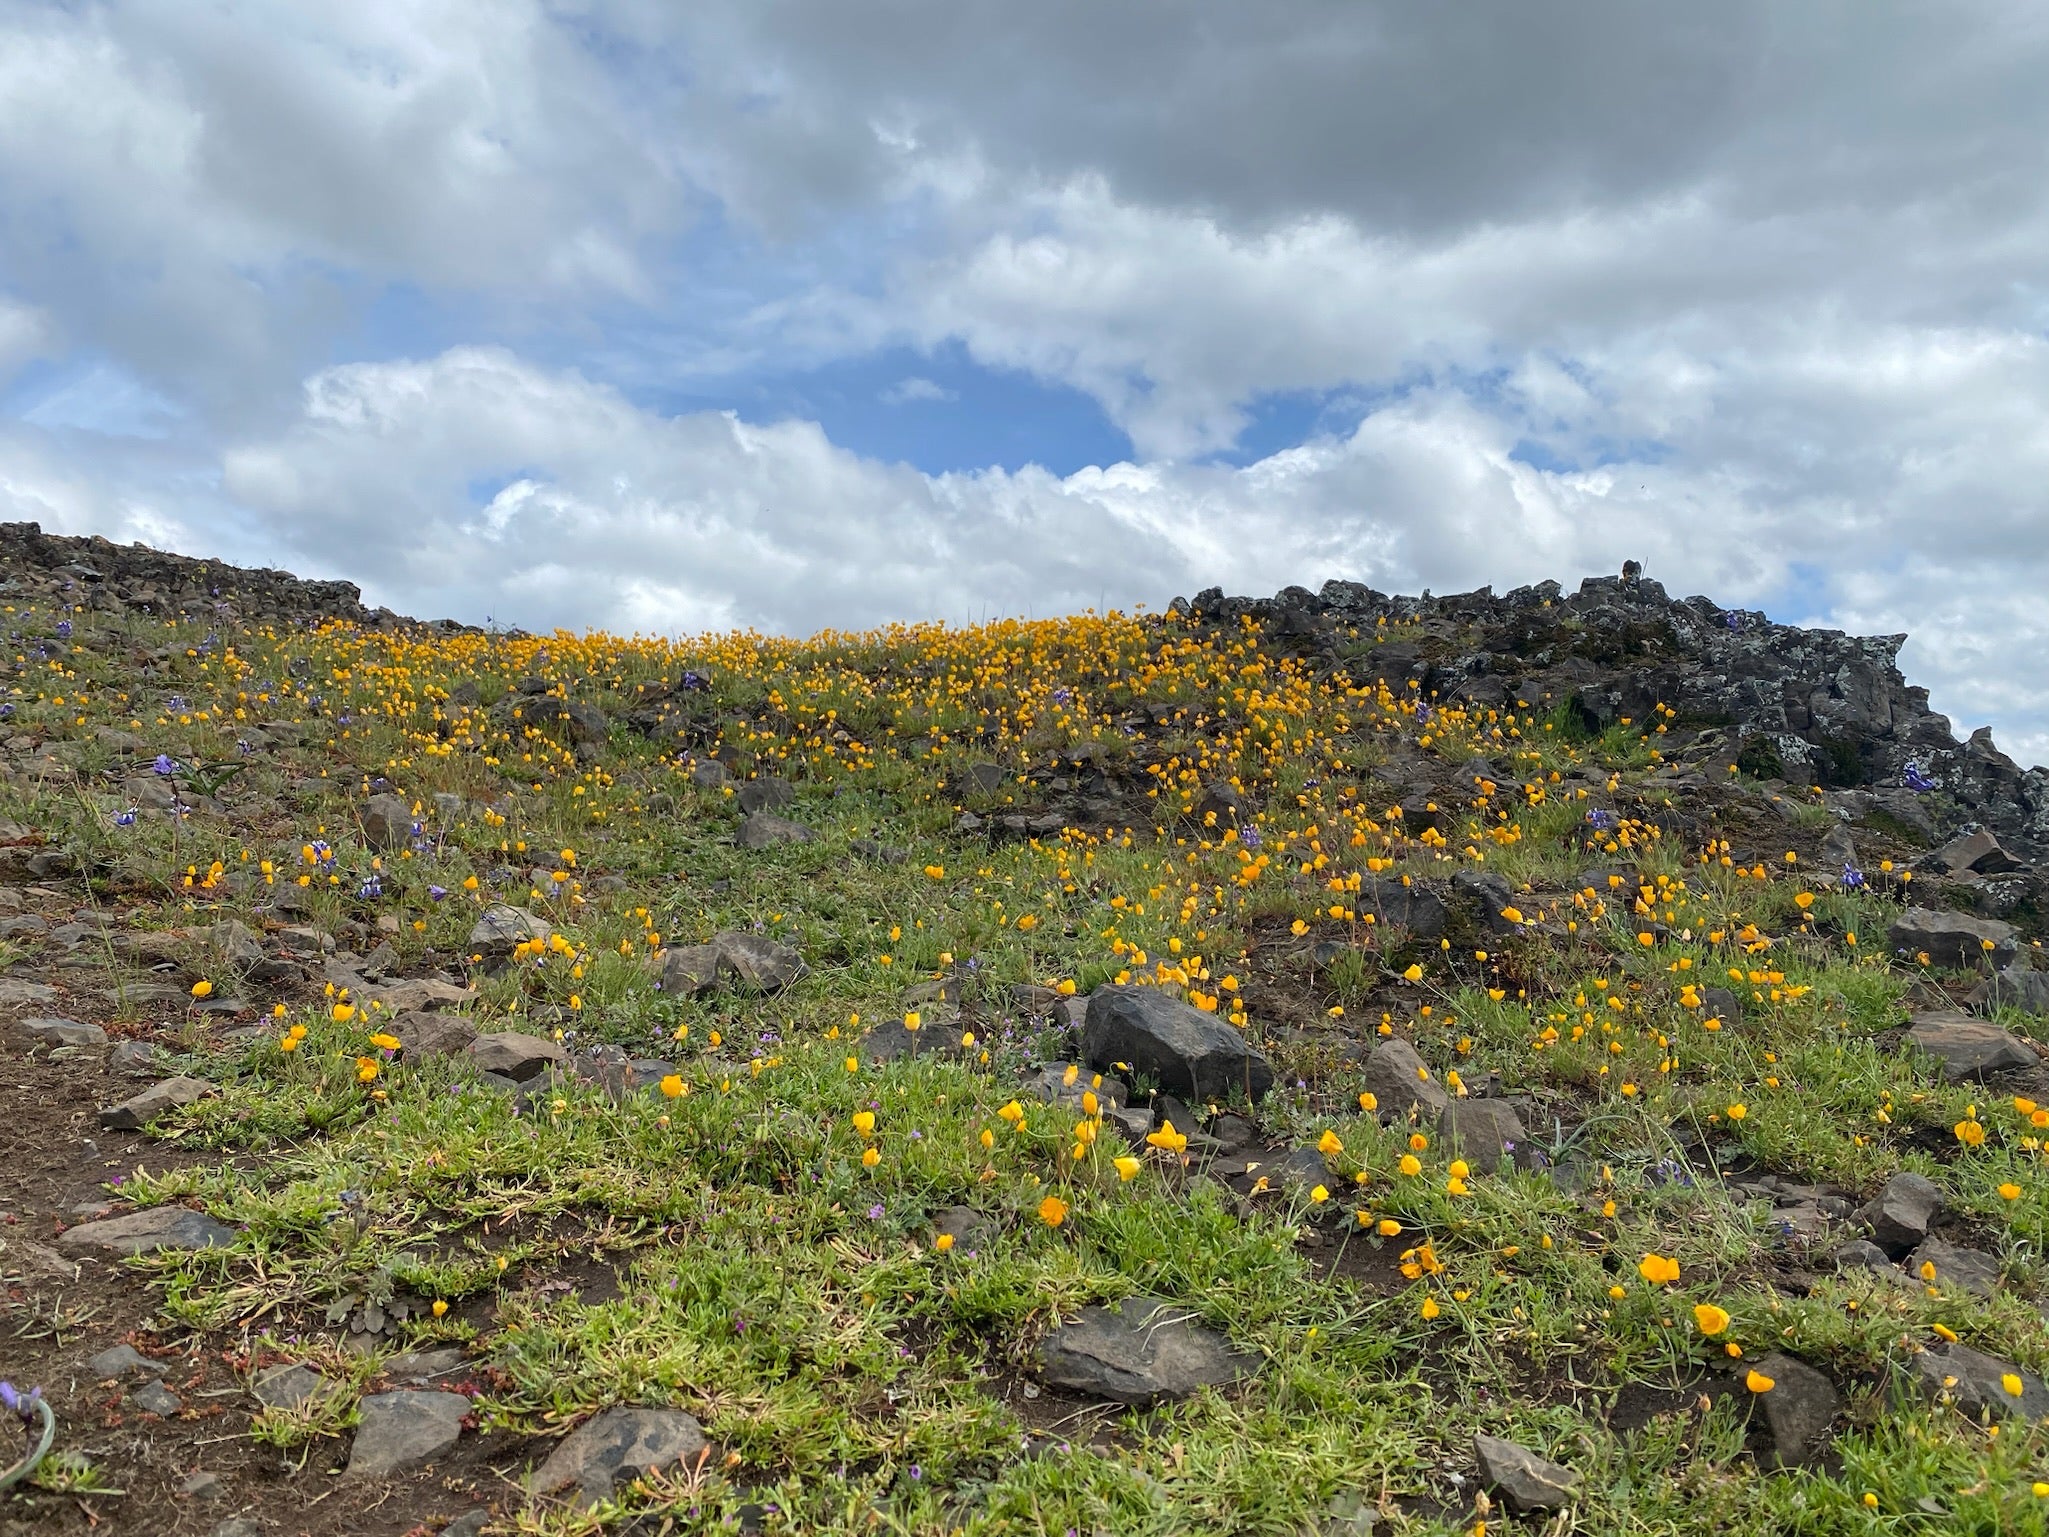 Wildflowers bloom on rocky landscape under blue skies and white clouds at North Table Mountain Ecological Reserve